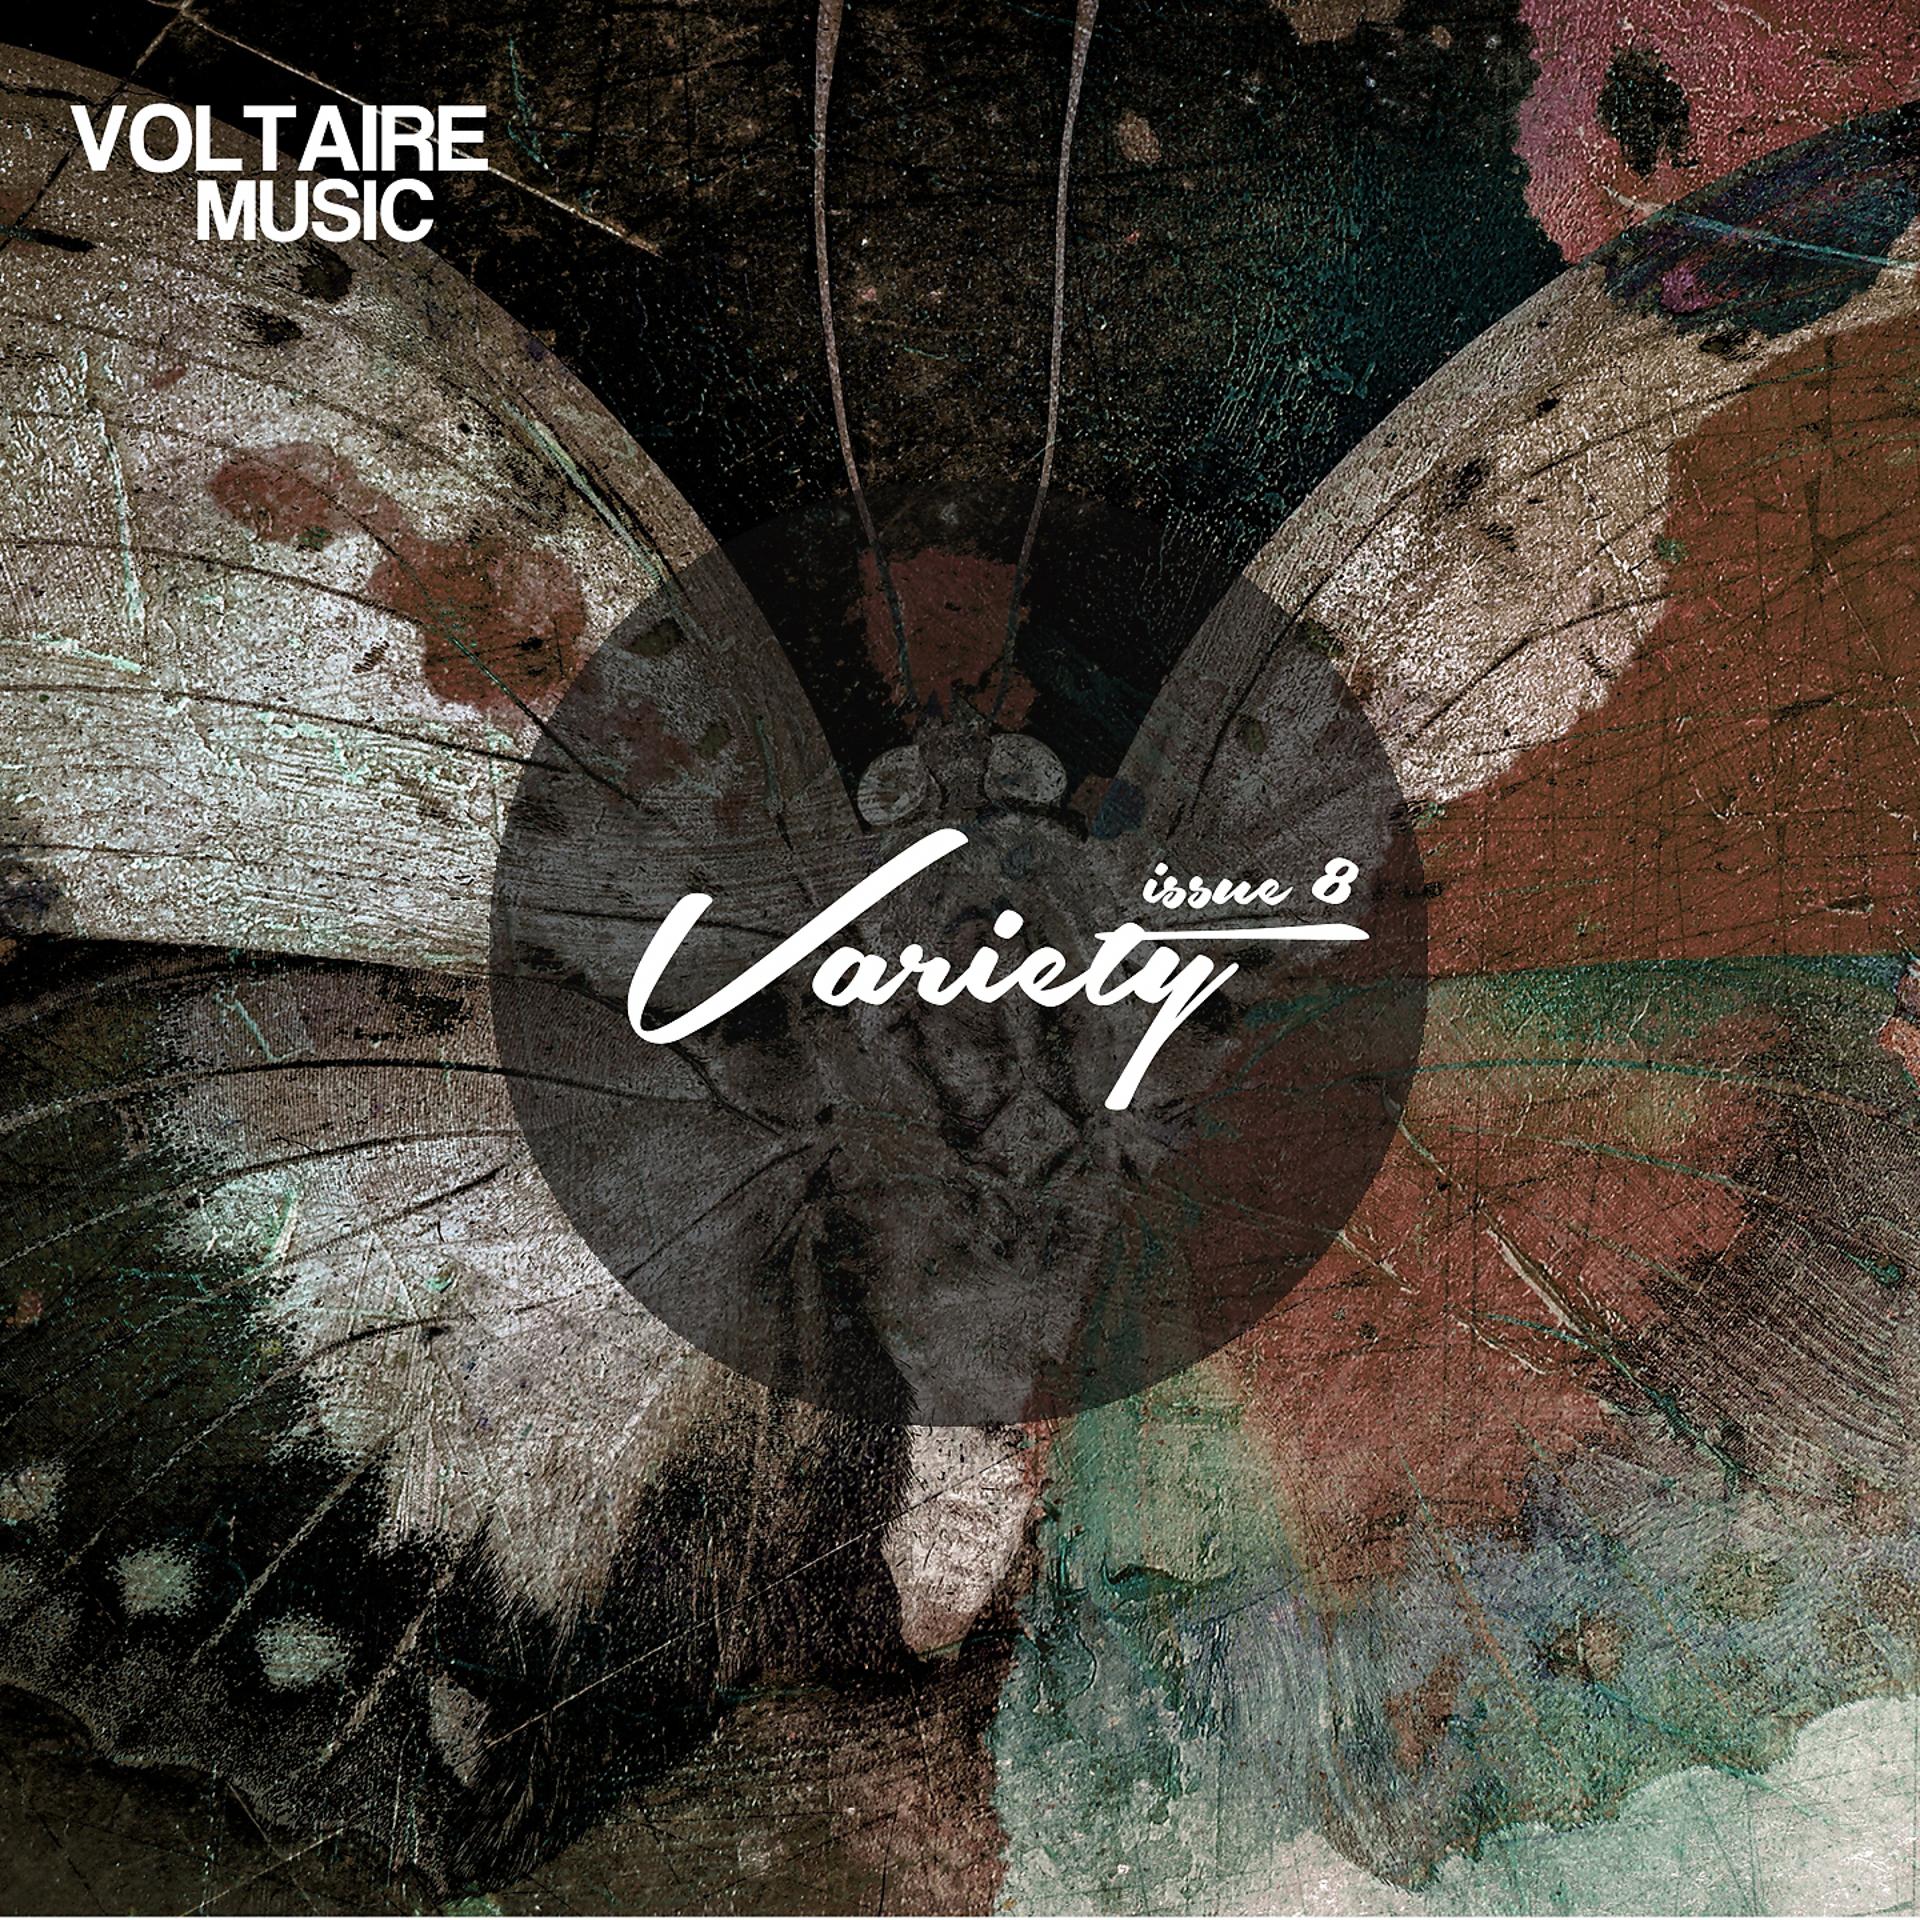 Постер альбома Voltaire Music pres. Variety Issue 8